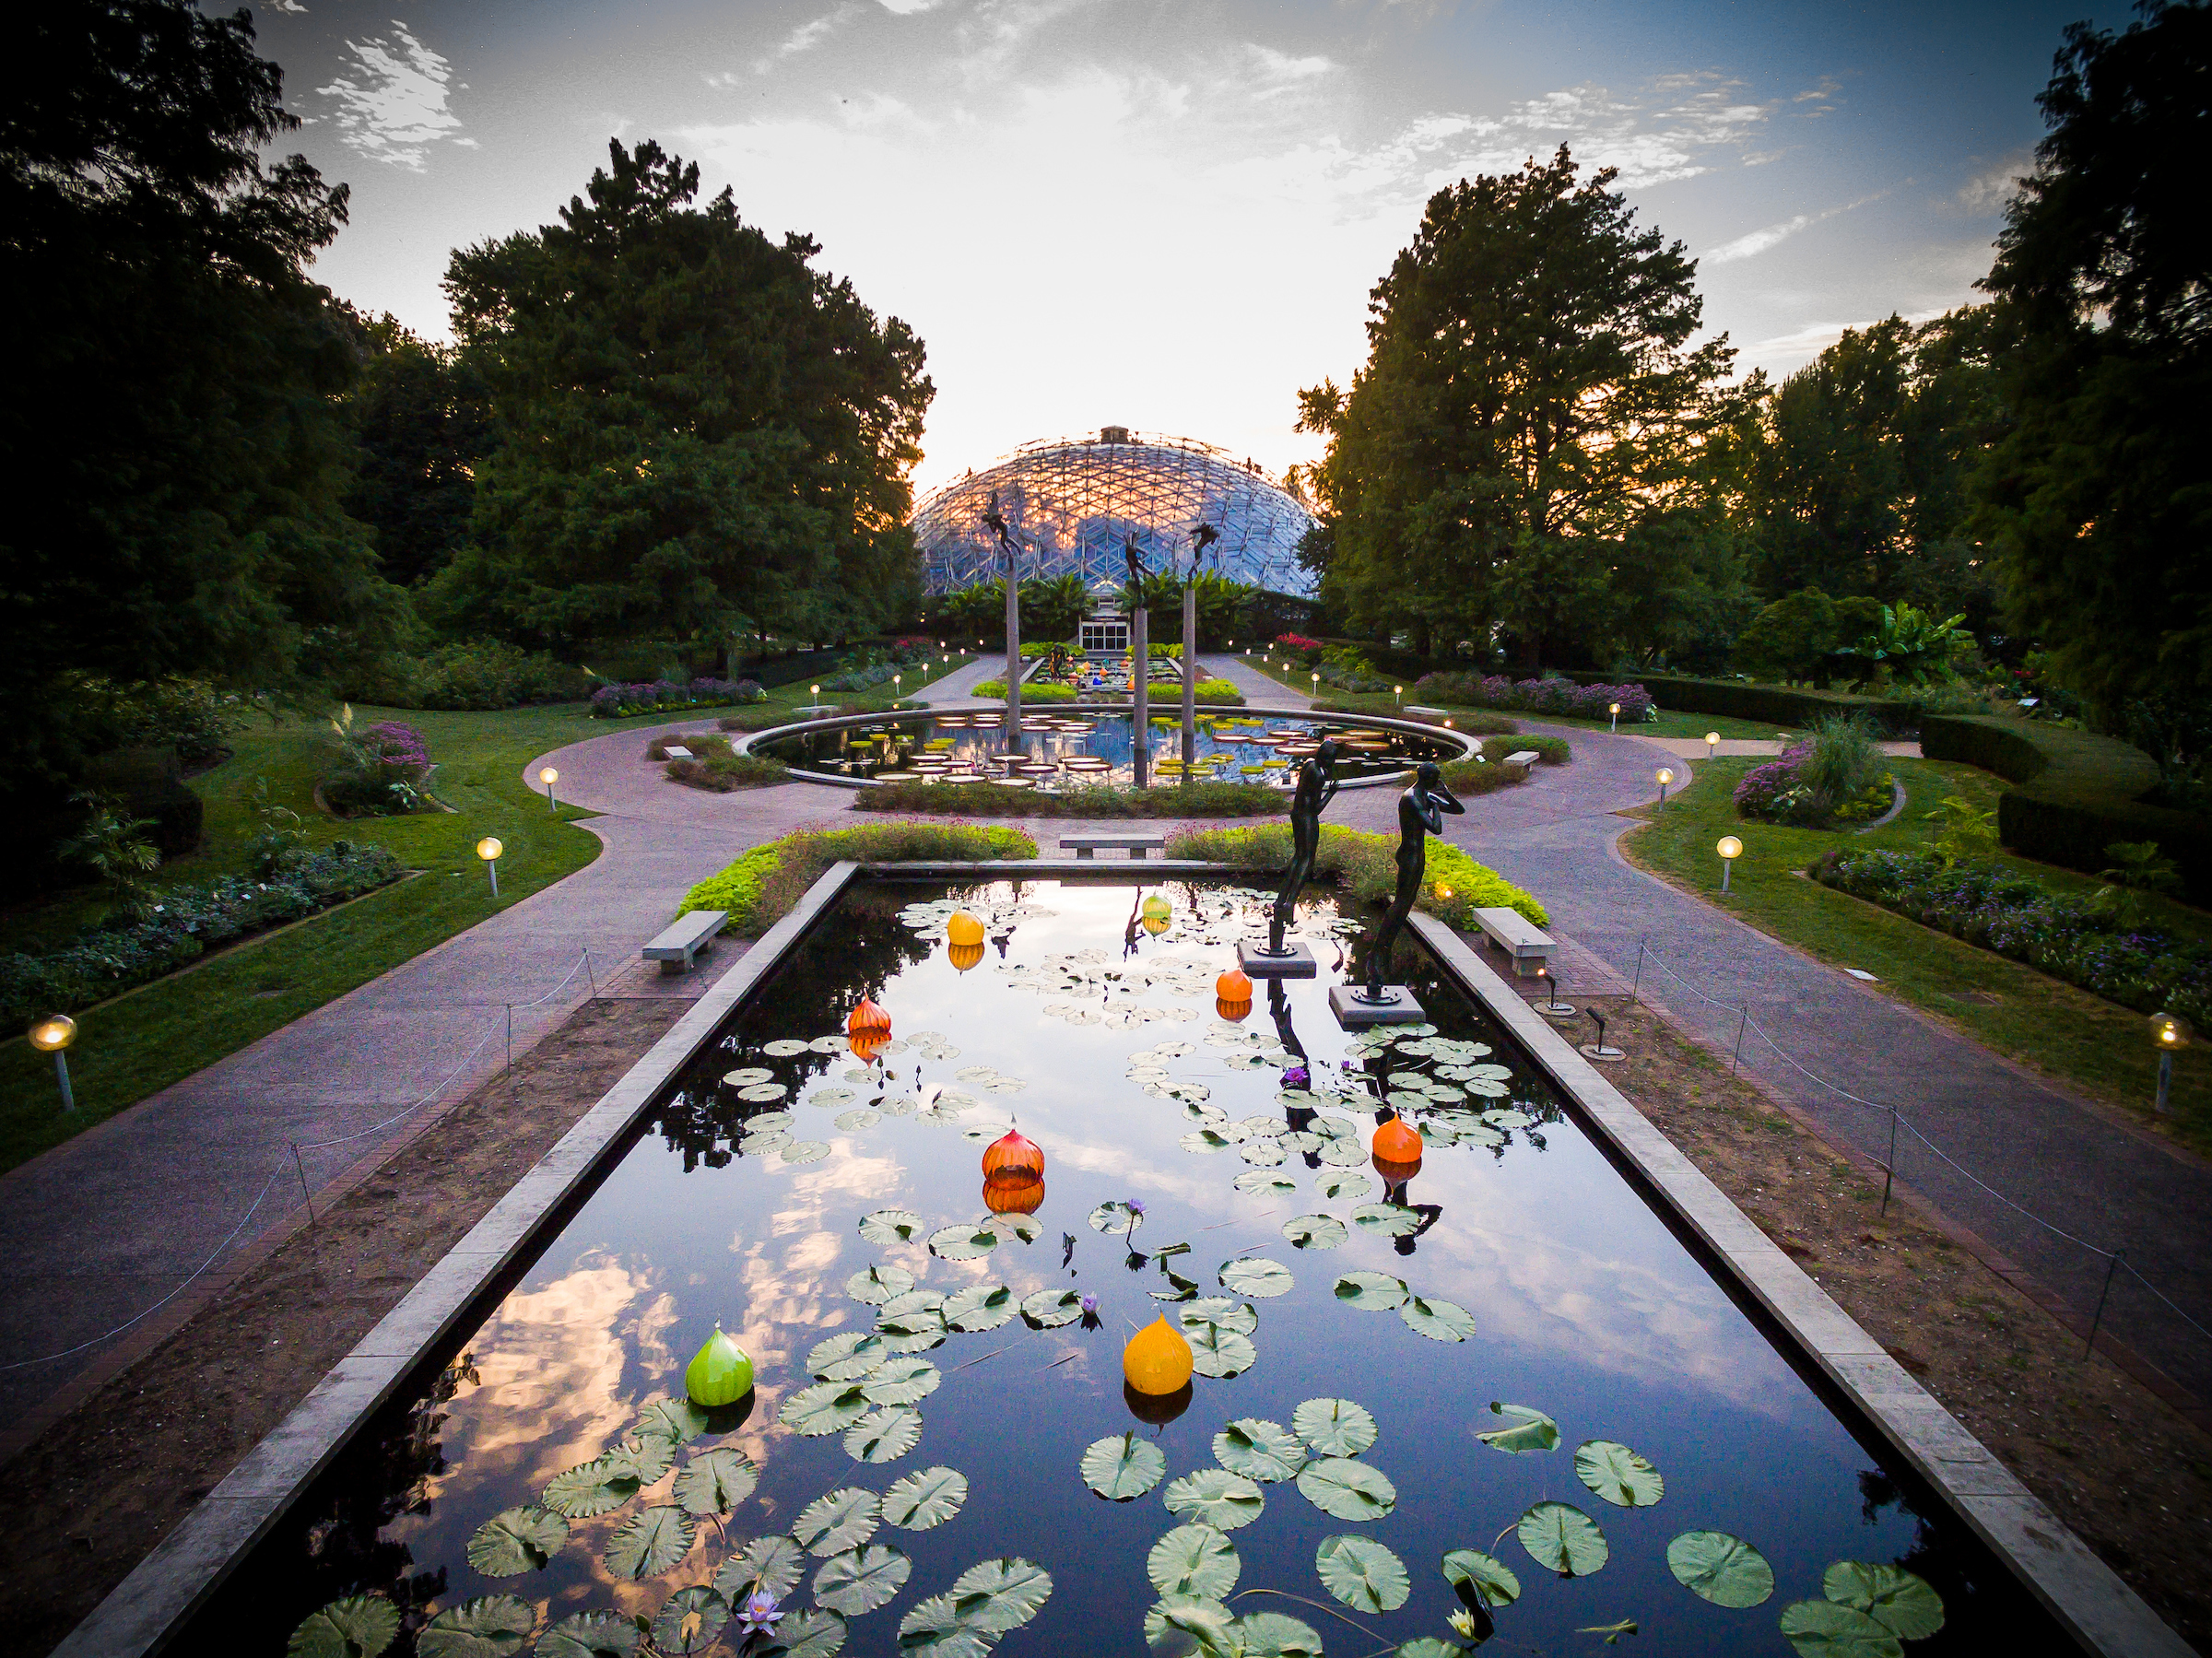 Visitor’s Guide: Extended Evening Hours at the Missouri Botanical Garden